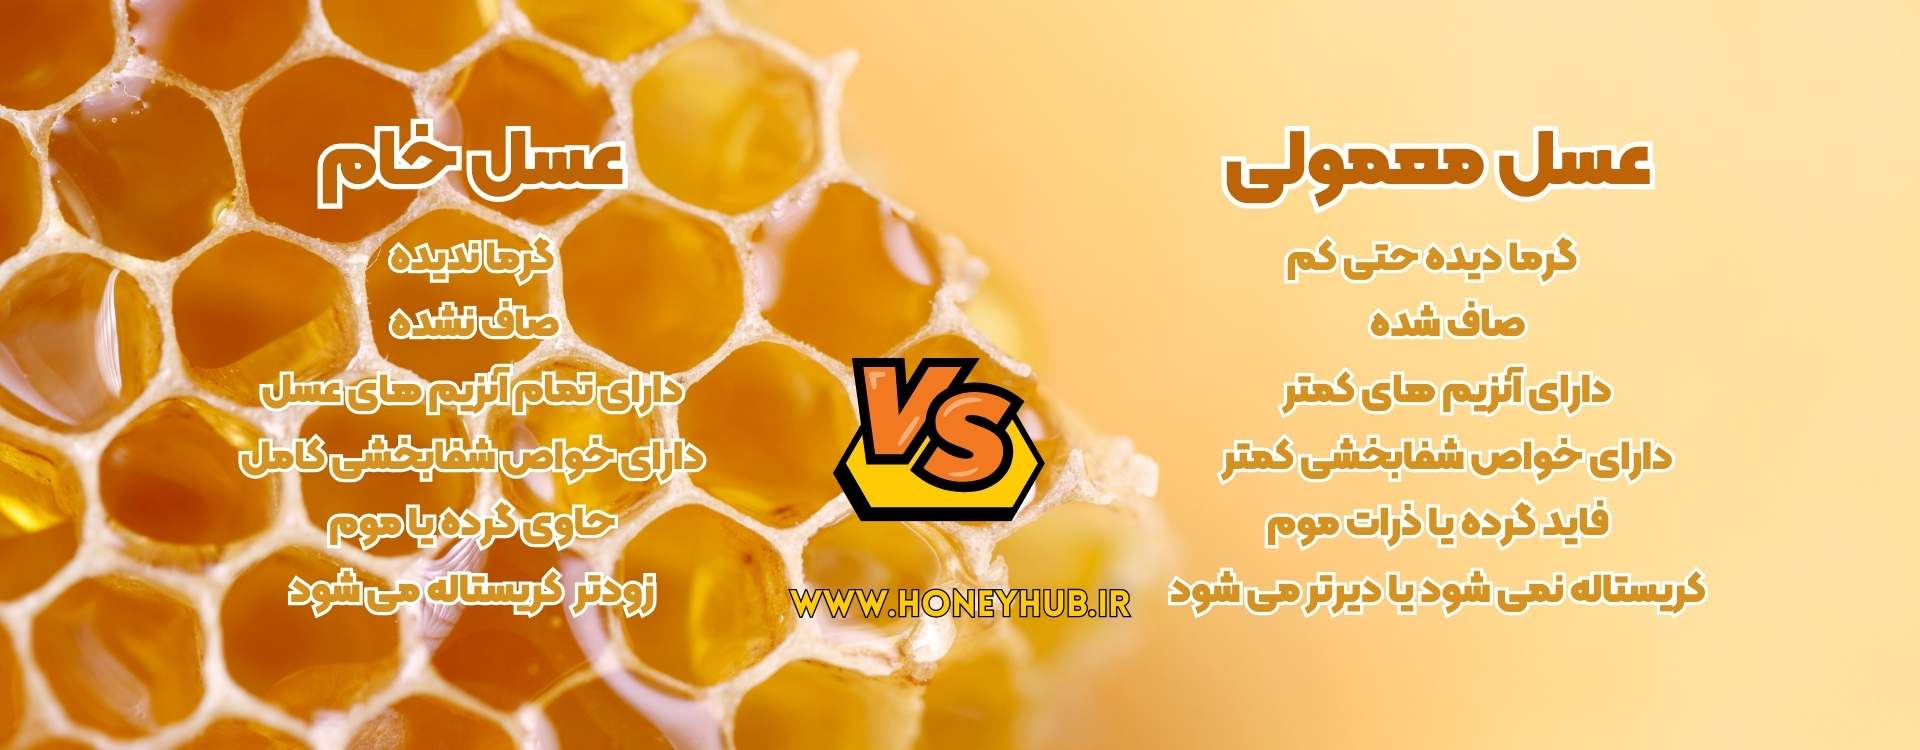 enzymes_in_honey-2-e1453060913773.png